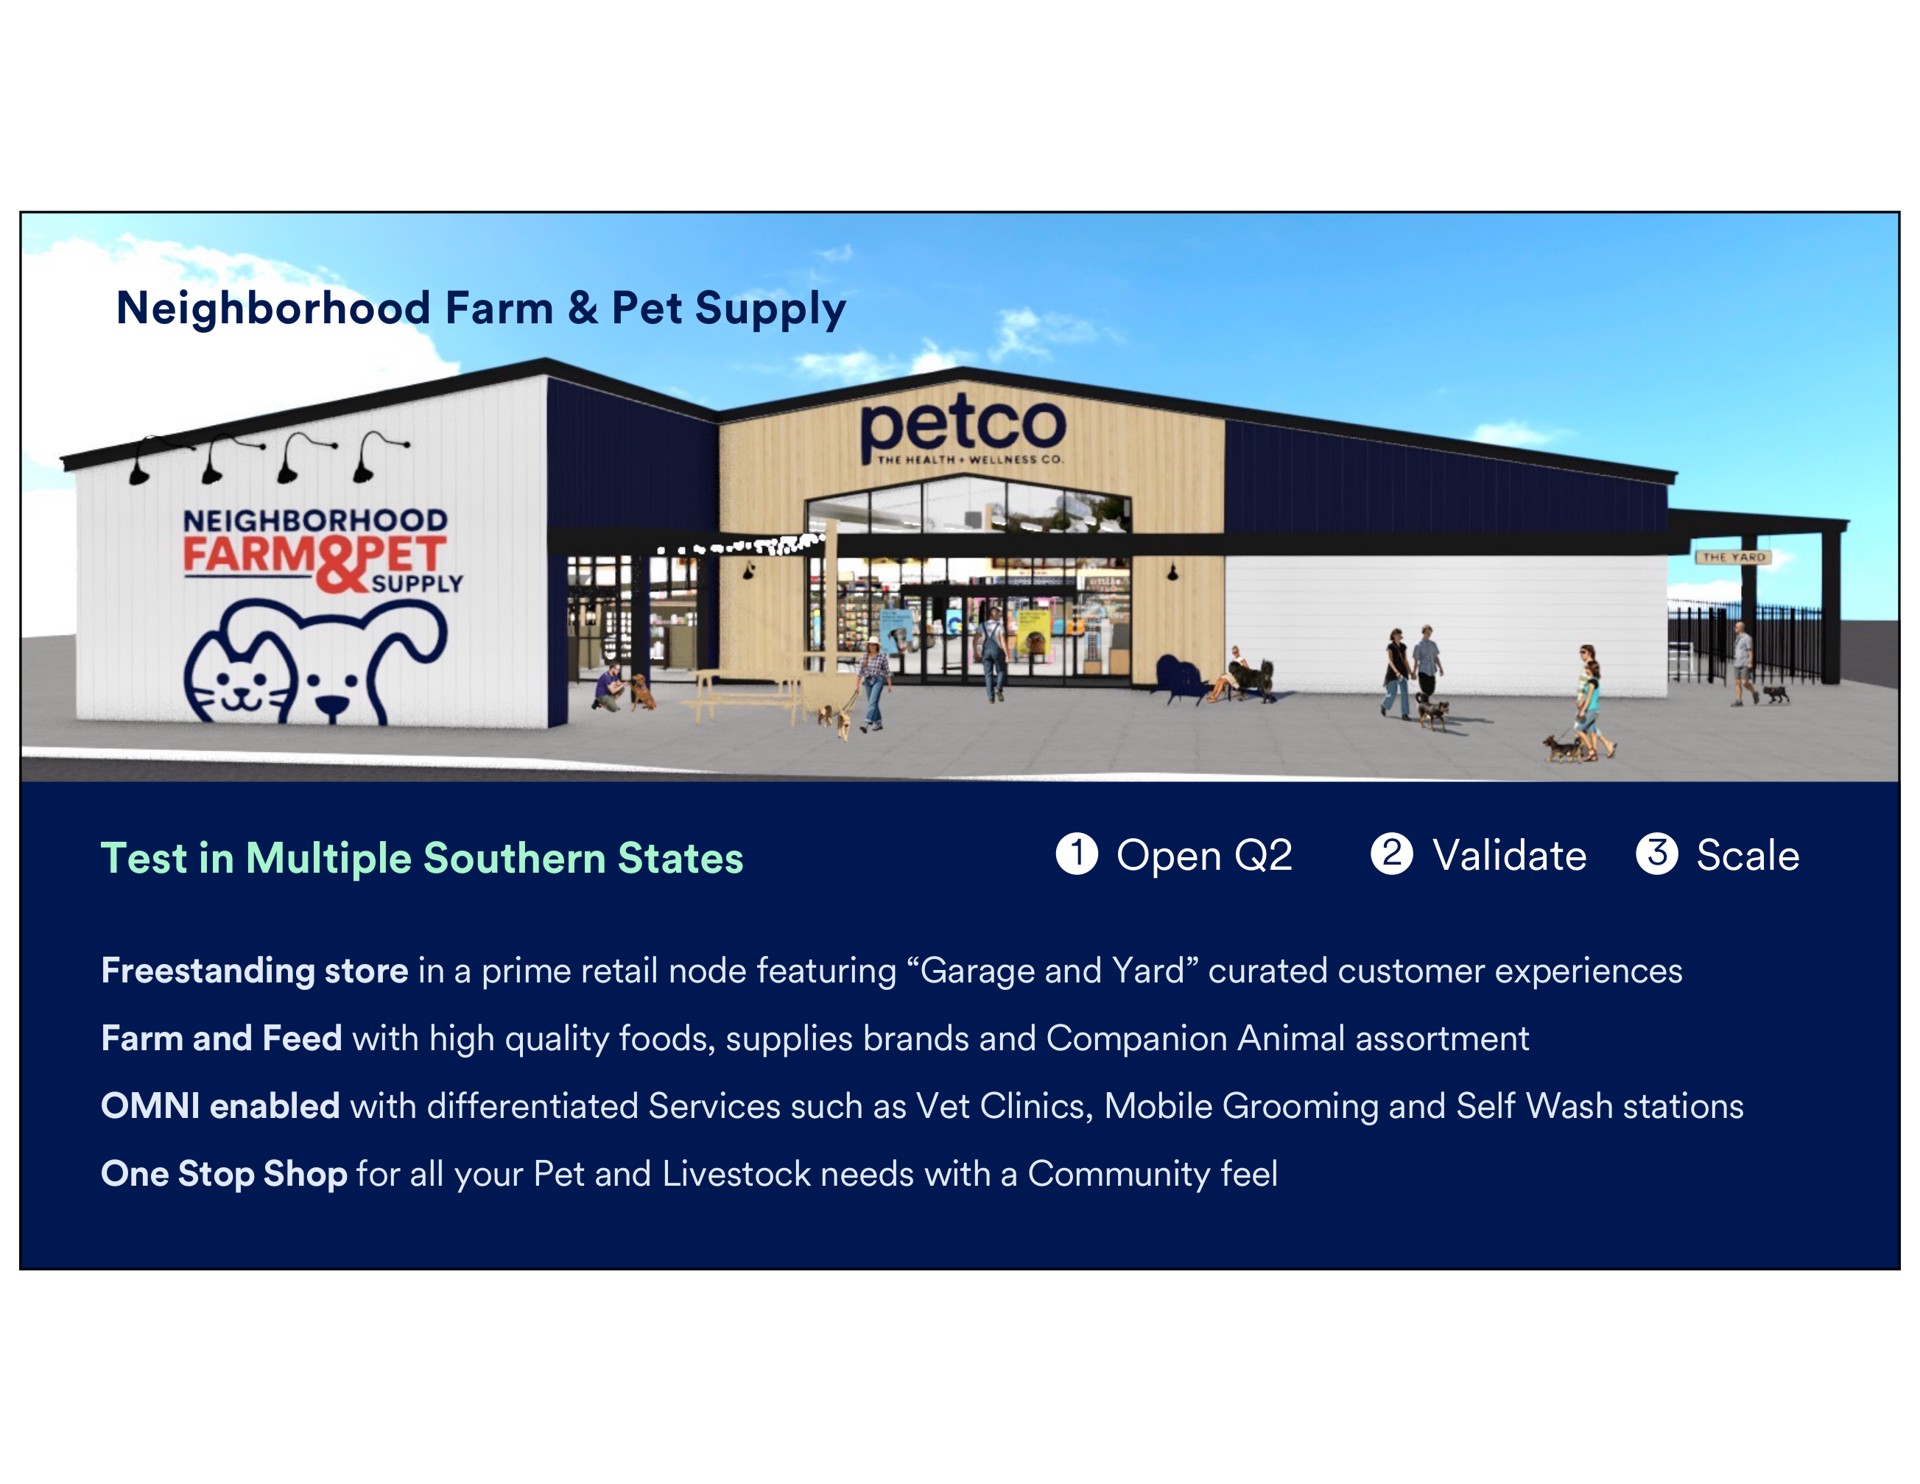 neighborhood farm pet supply test in multiple southern states open validate scale ide freestanding store a prime retail node featuring garage and yard customer experiences one stop shop for all your and livestock needs with a community feel enabled with differentiated services such as vet clinics mobile grooming and self wash stations and feed with high quality foods supplies brands and companion animal assortment | Petco